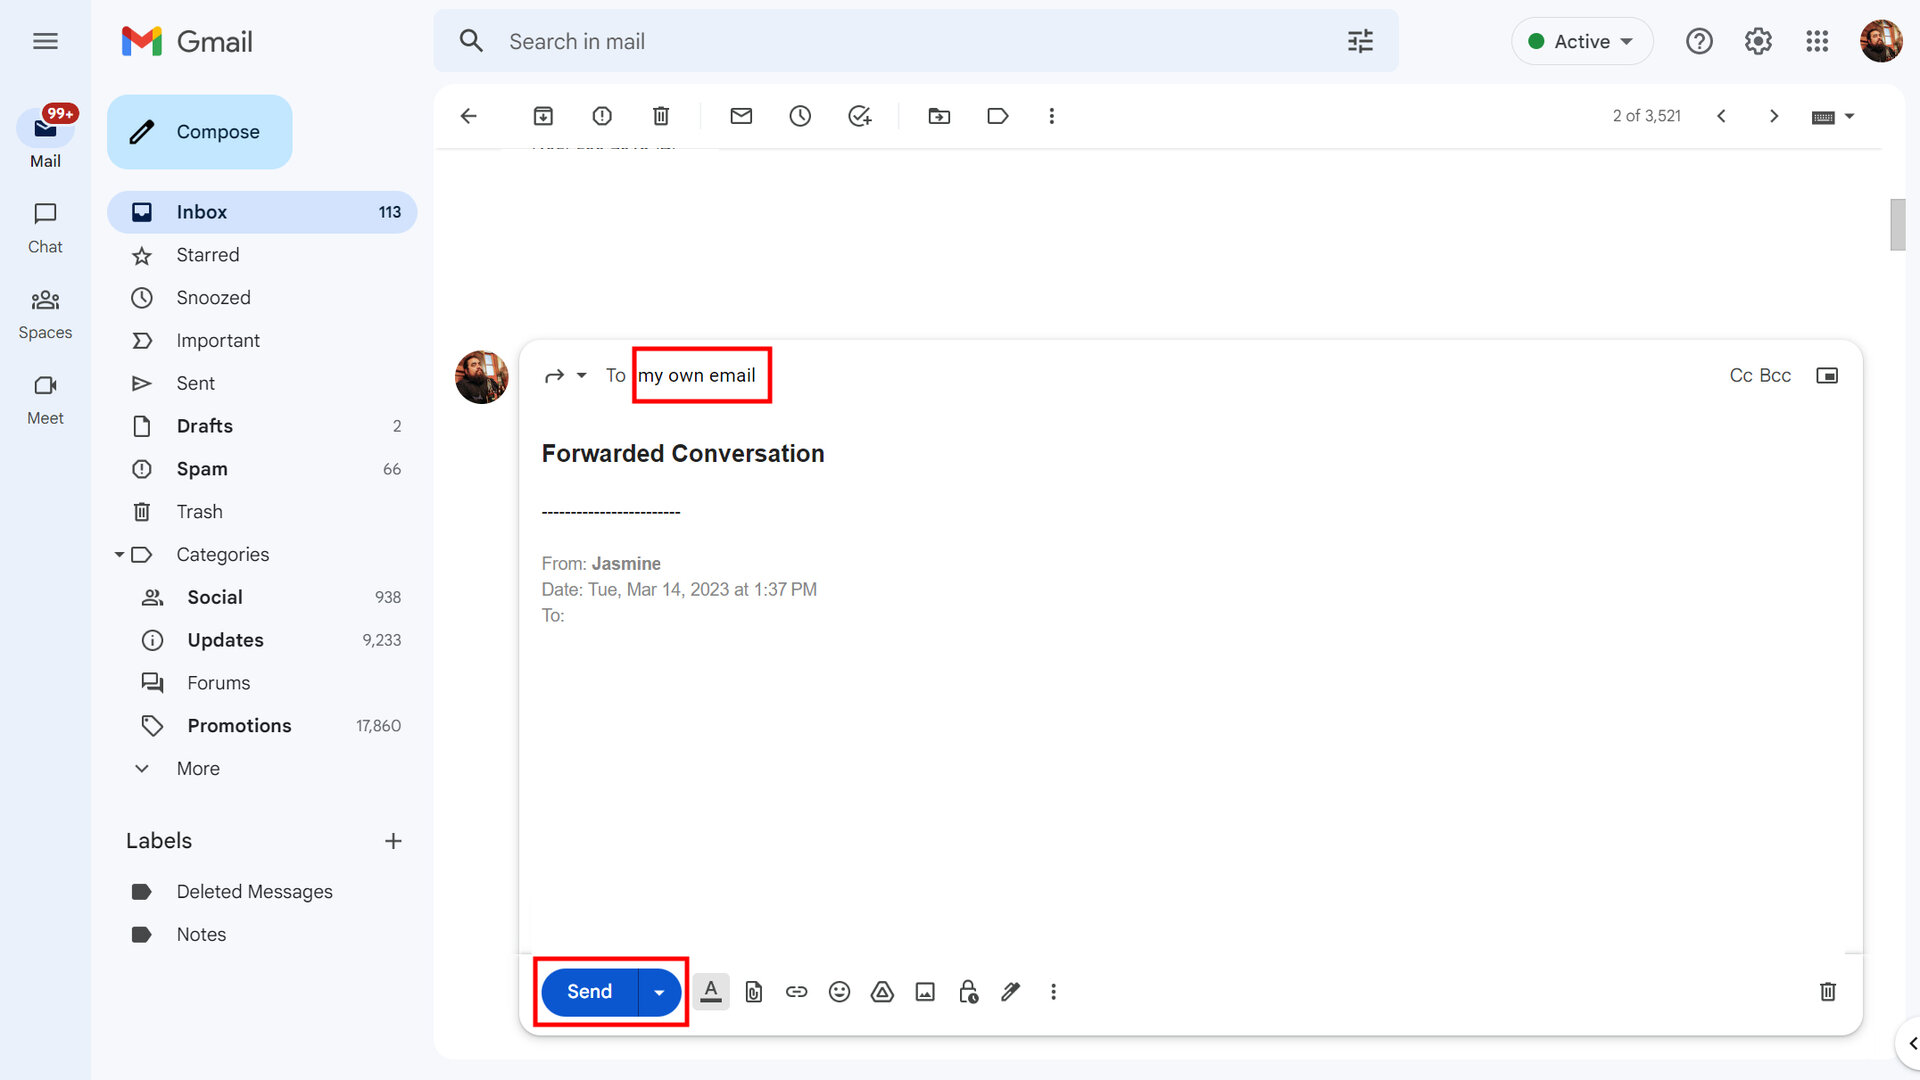 How to download all attachments from a Gmail conversation 3